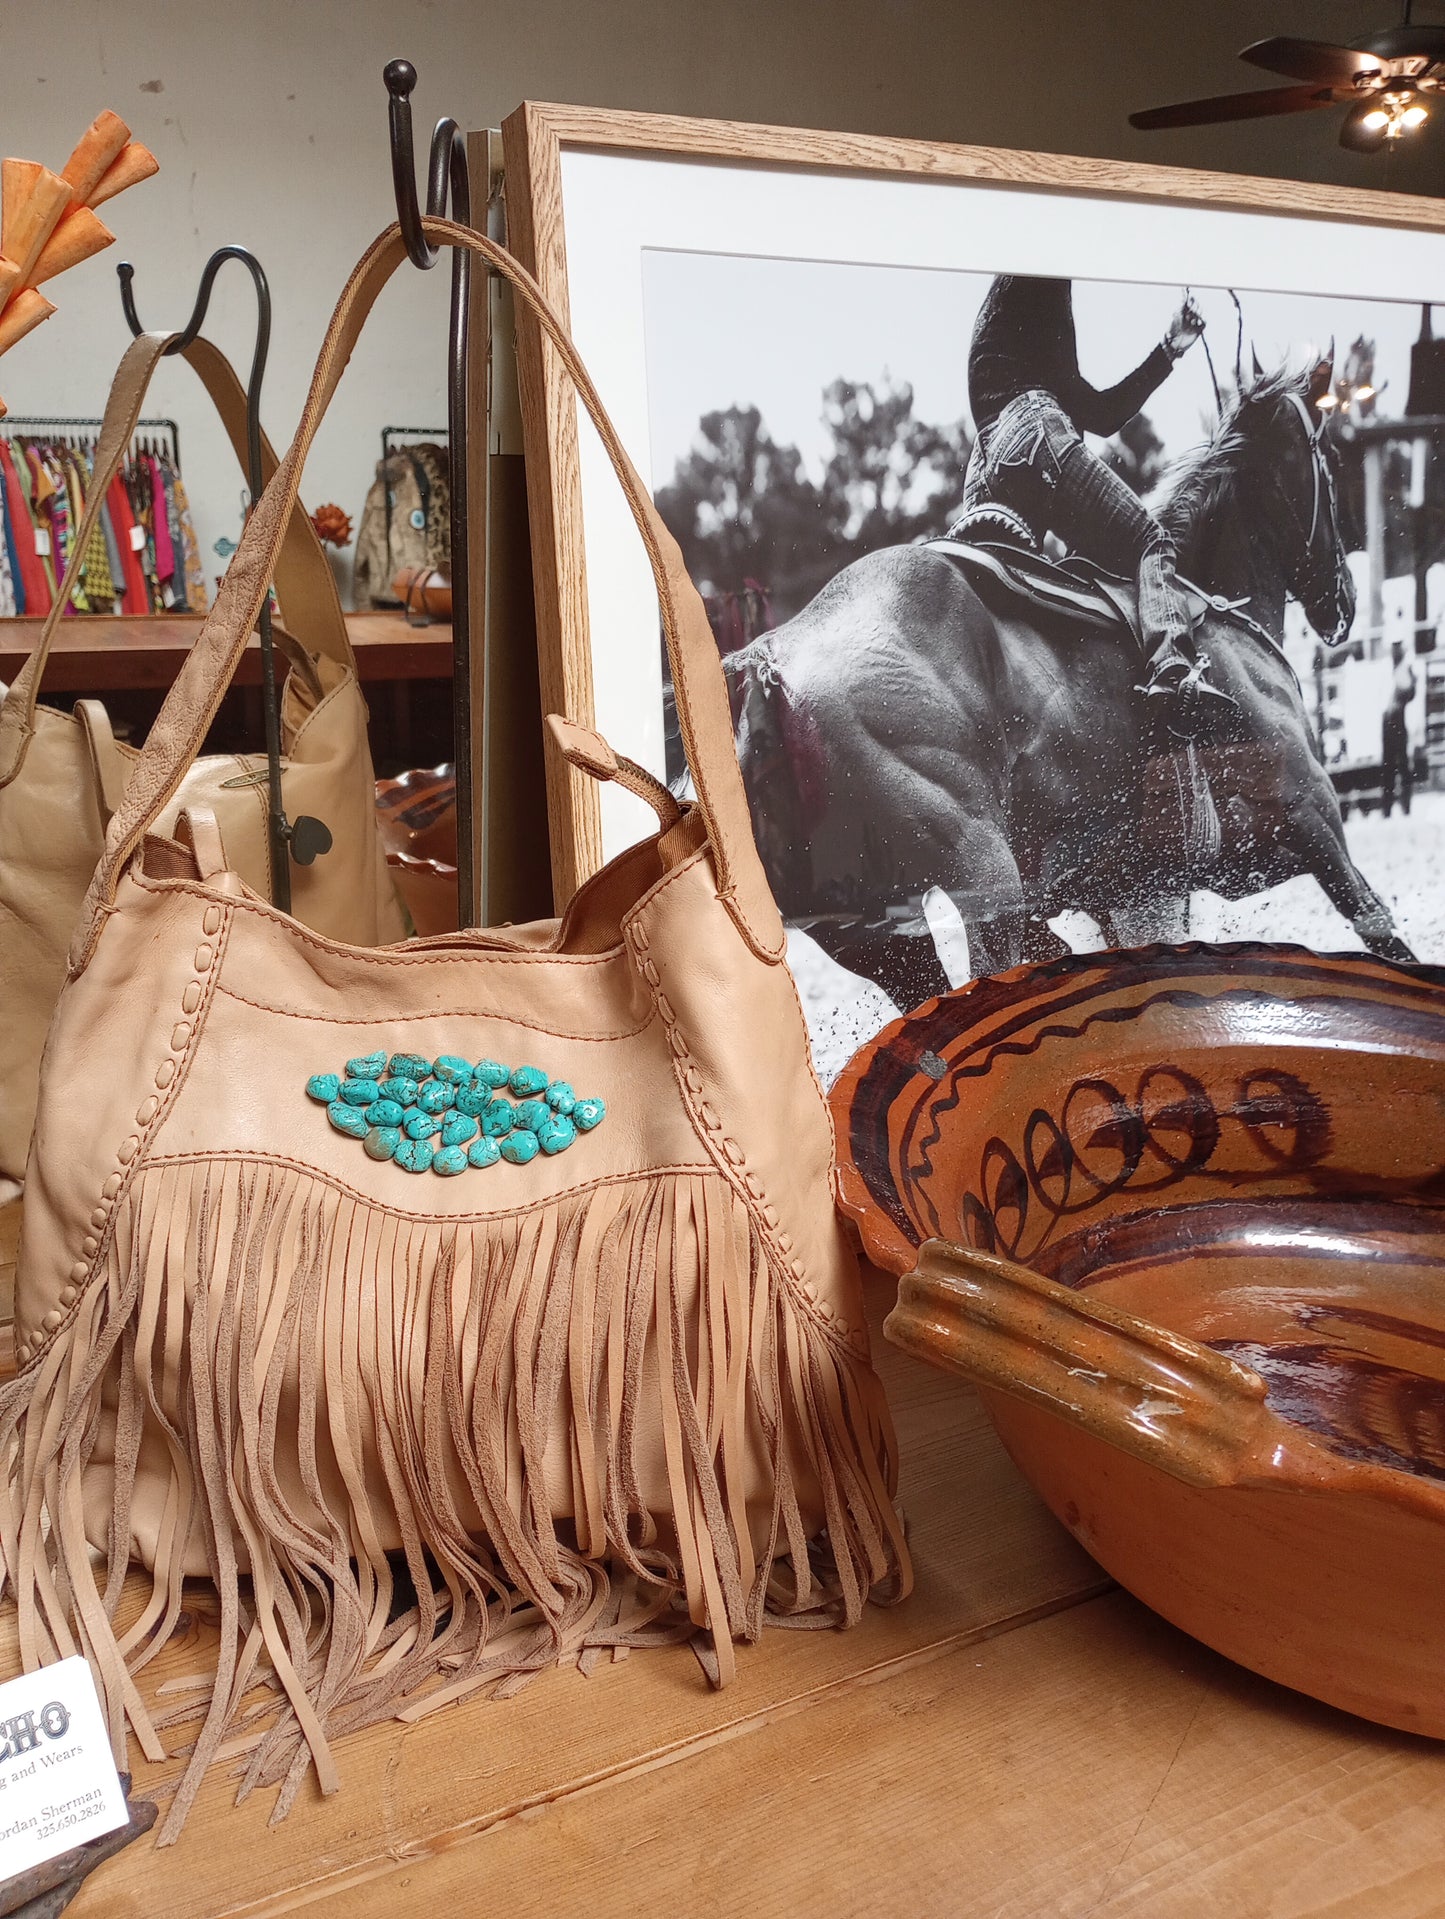 Leather Fringe Purse w/ Turquoise Chunks Sewn Into Front Panel Design